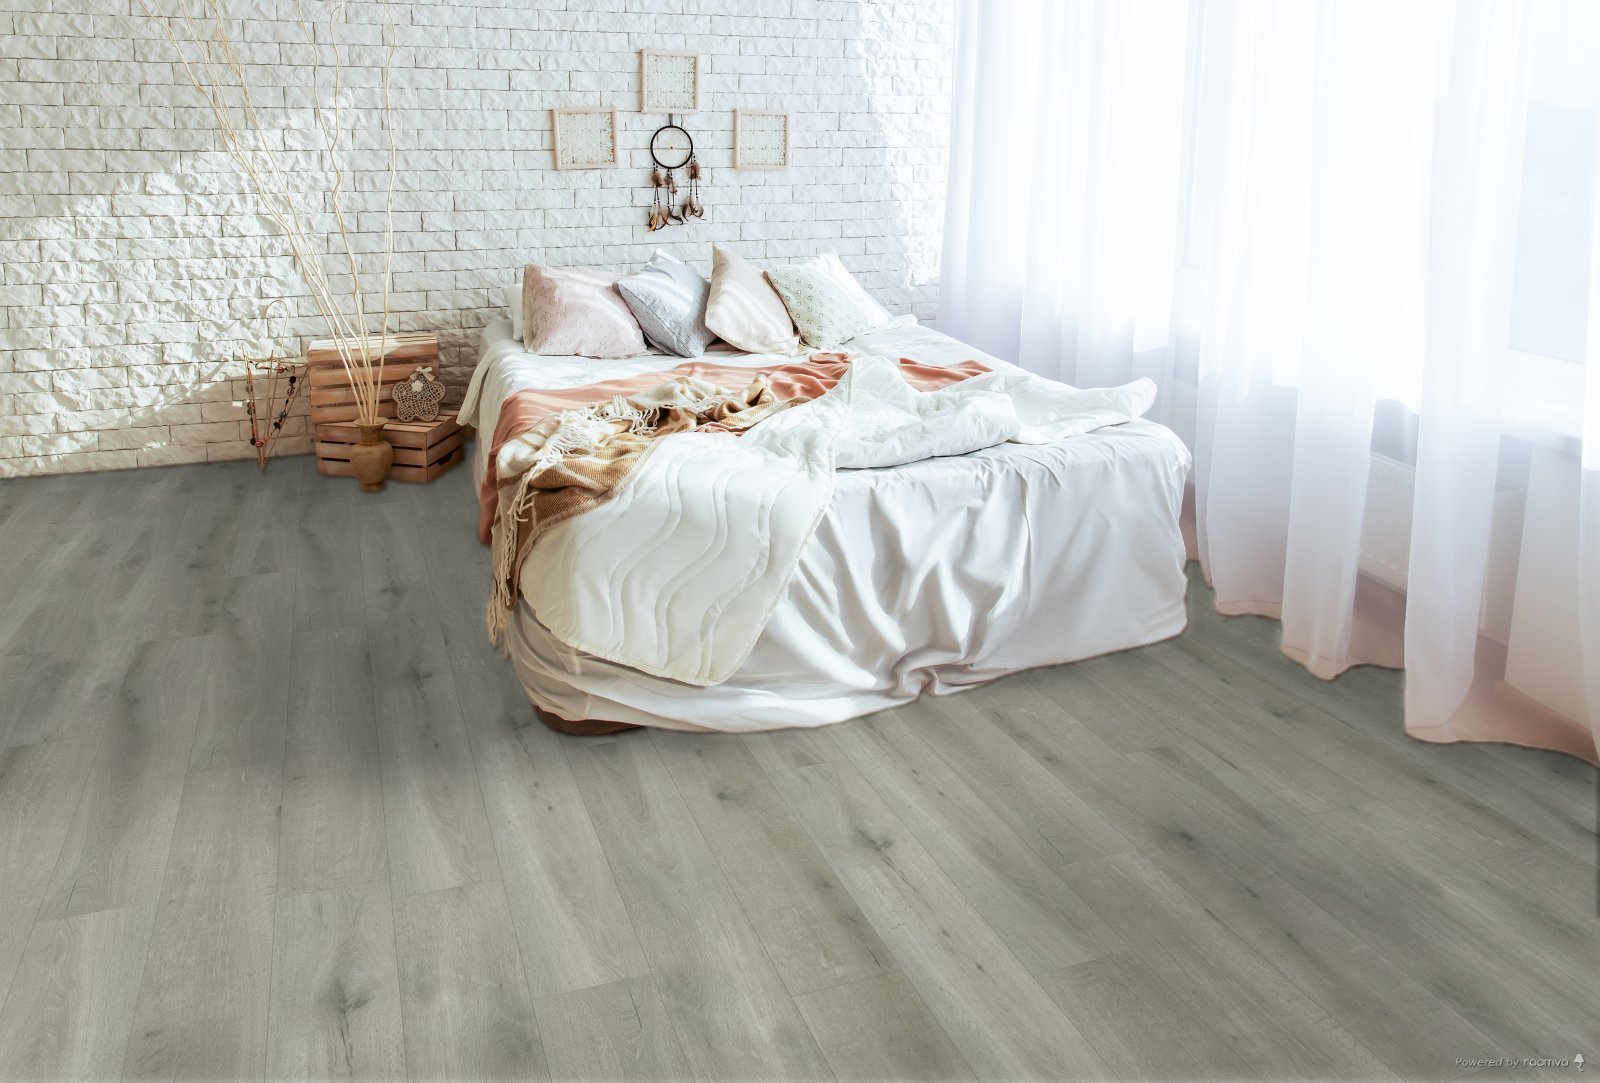 Horizen Flooring presents to you a picture of a quality wide plank Verdi luxury vinyl plank. NovoCore Q XXL Tango collection features a wide range of colors & designs that will compliment any interior. Natural wood grain synchronized surface allow for an authentic hardwood look & feel. This collection features a 0.3″ / 7.5 mm overall thickness and a durable 22 mil / 0.55 mm wear layer for residential and commercial applications.